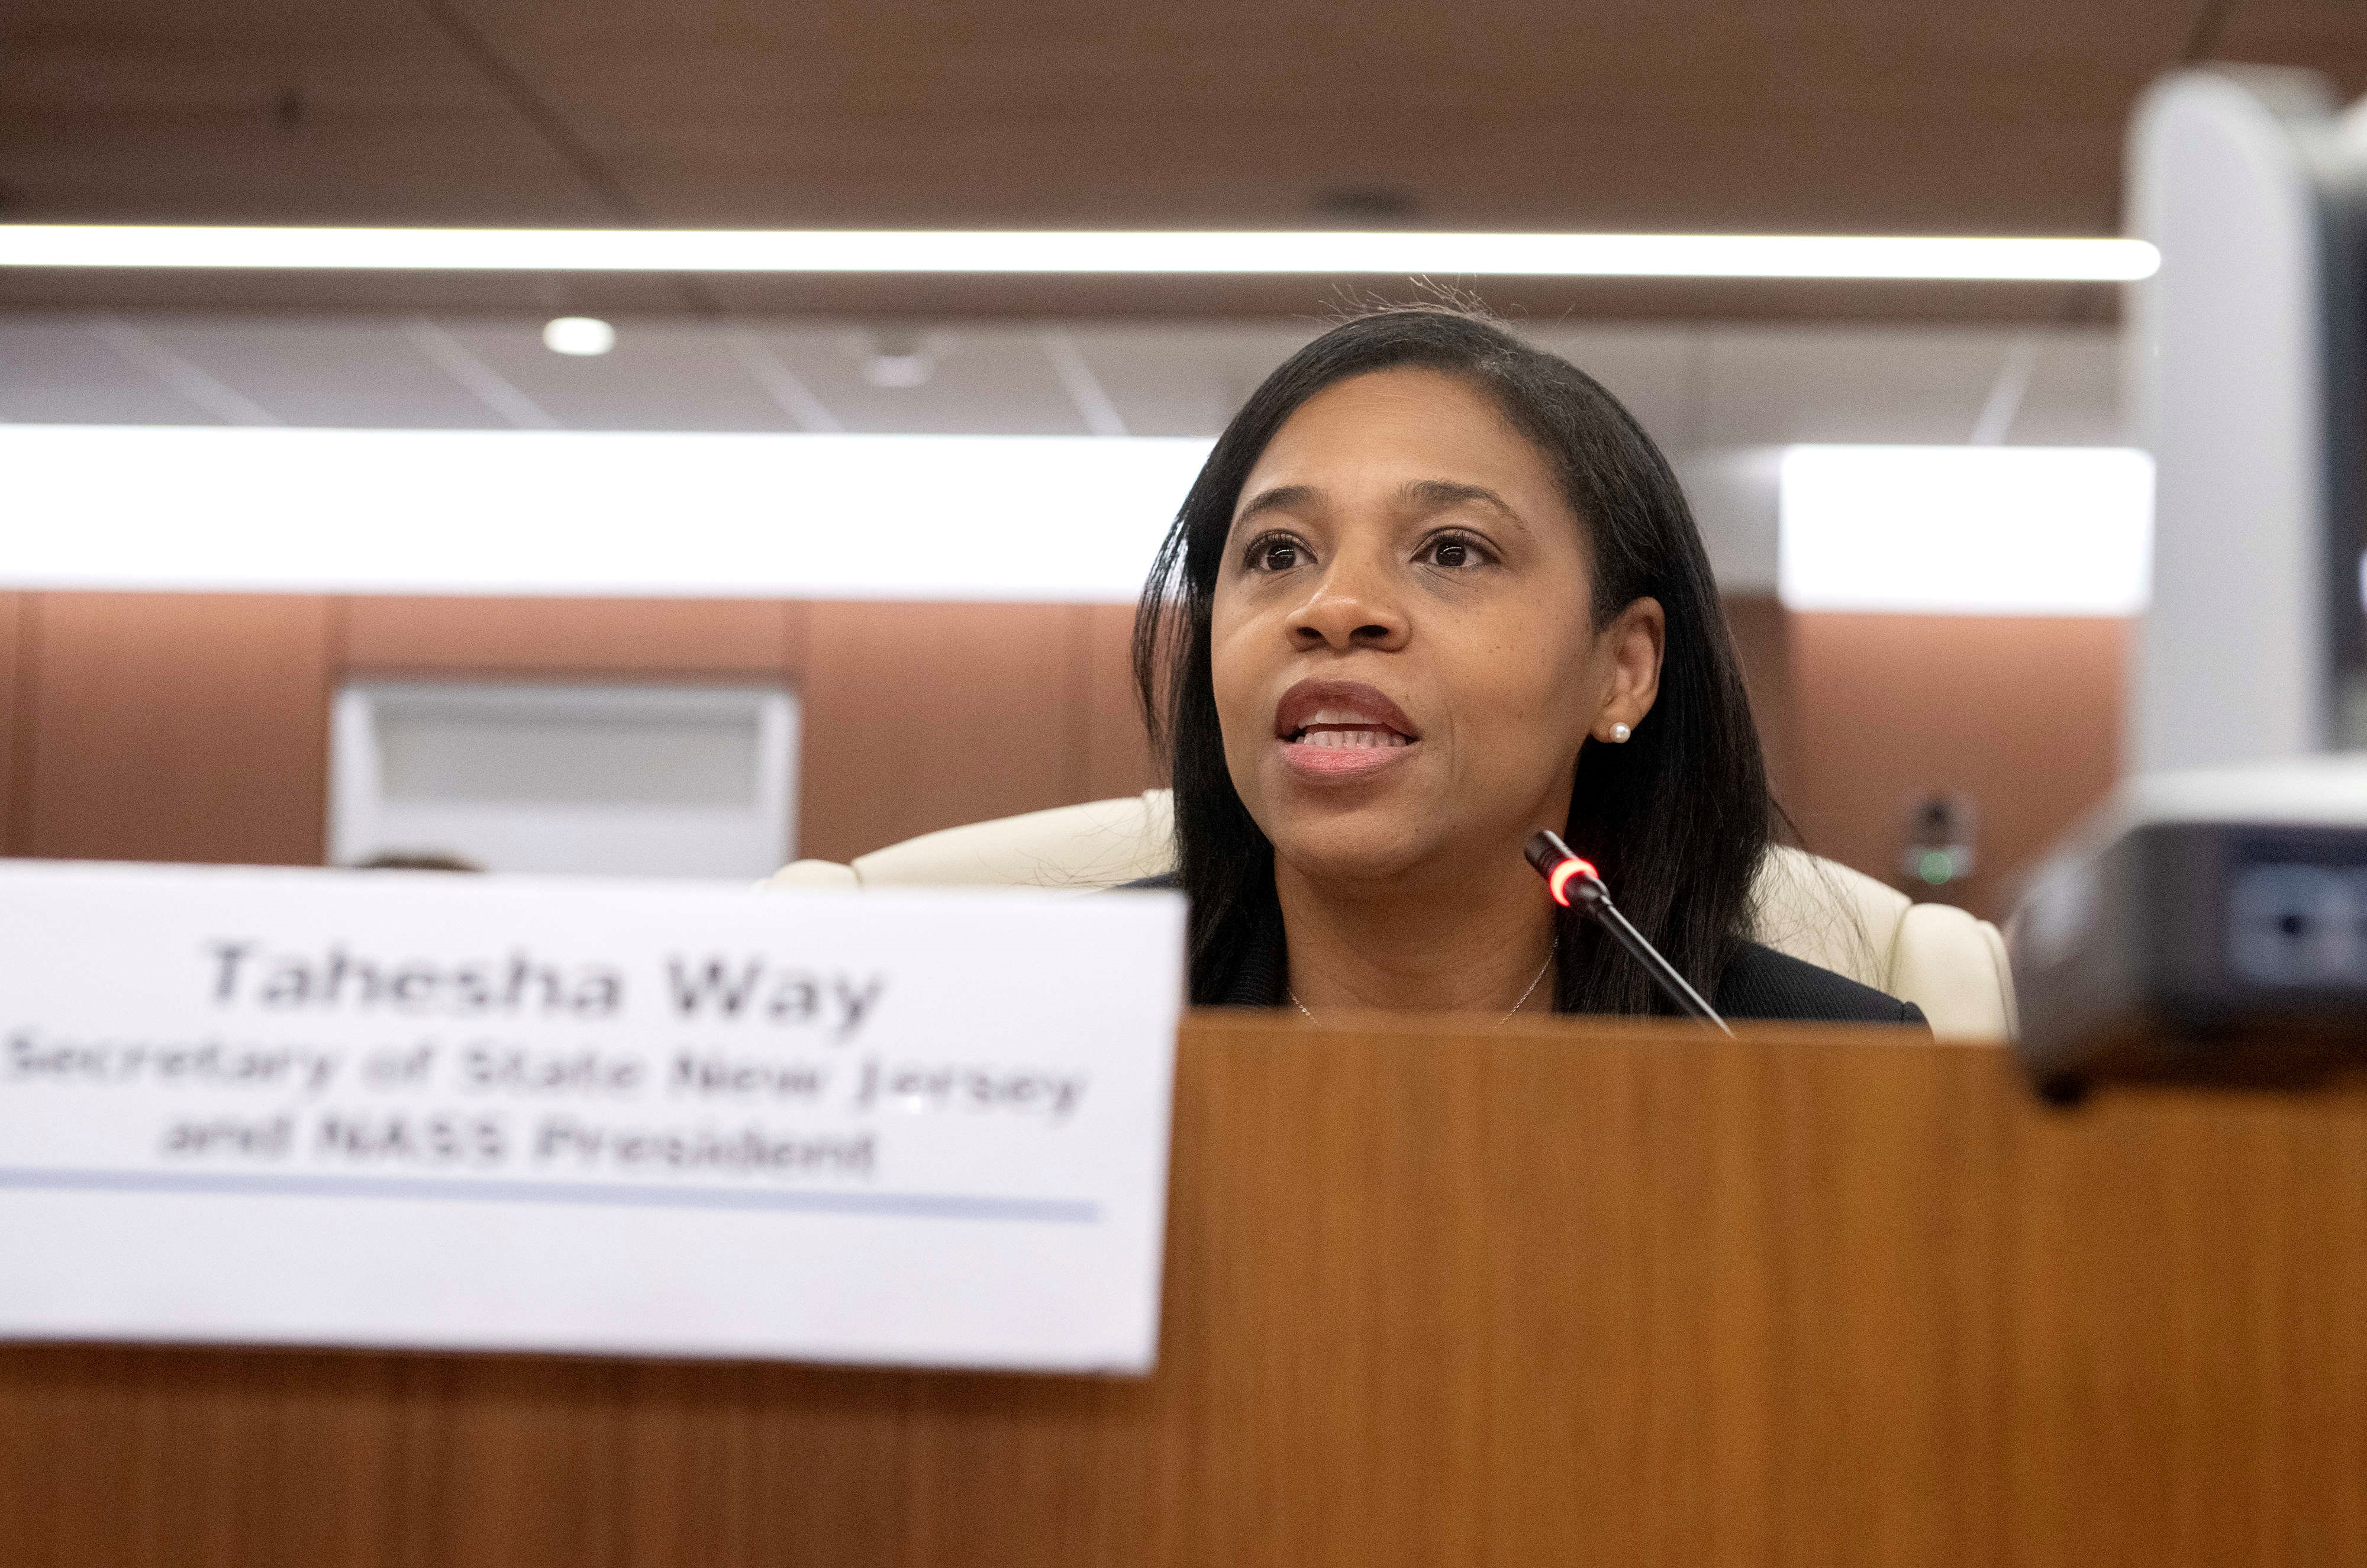 The Honorable Tahesha Way, New Jersey Secretary of State and National Association of Secretaries of State (NASS) President testifies before the EAC Commissioners.